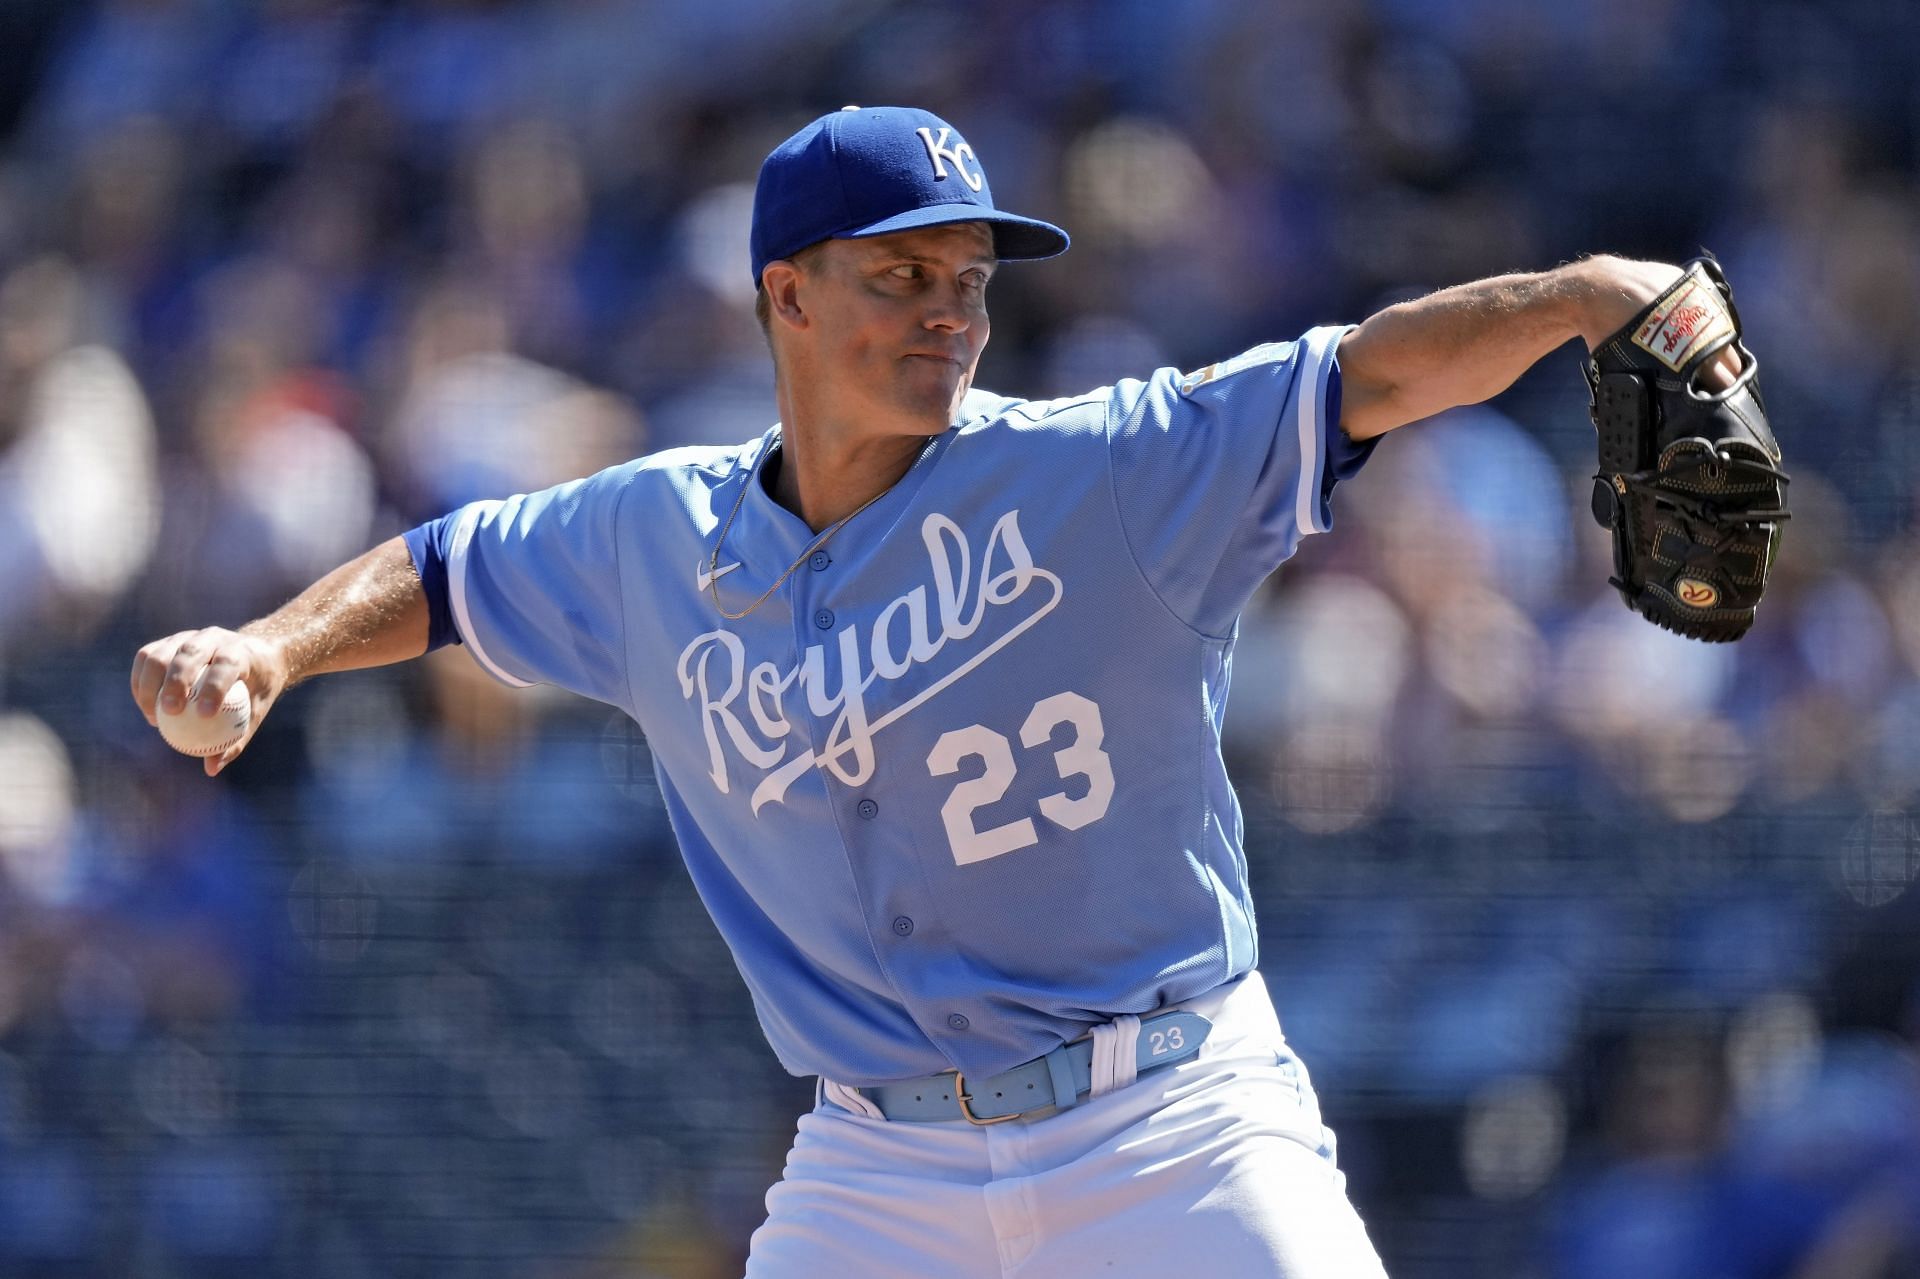 Royals' Zack Greinke: The curveball was the only good option